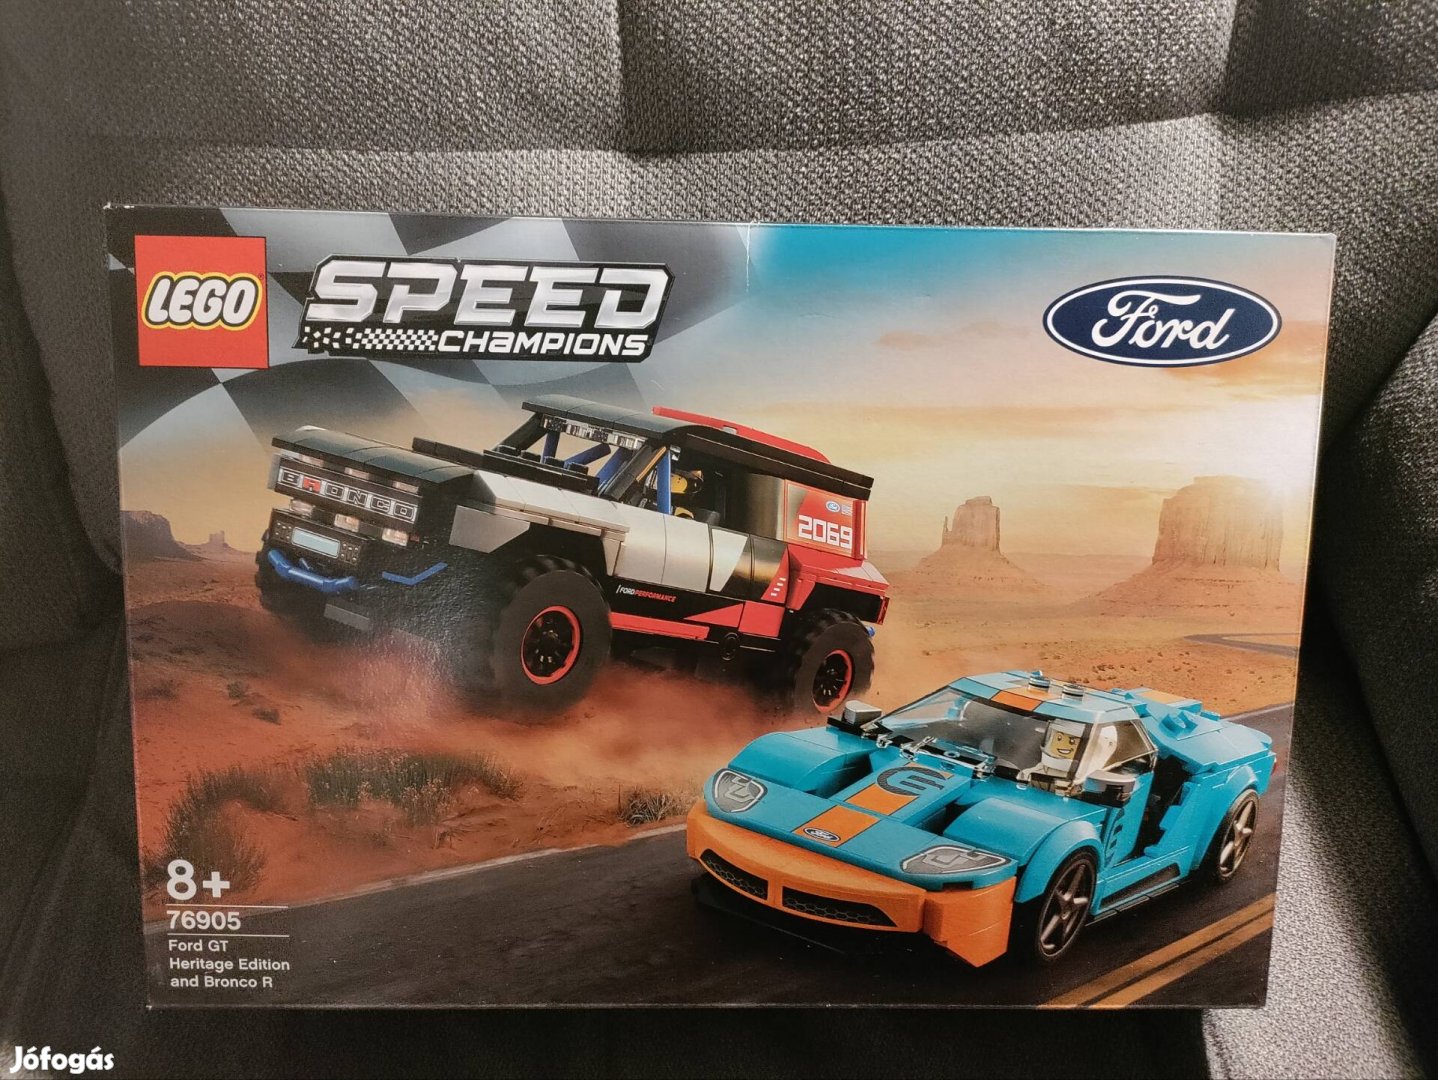 Lego Speed Champions 76905 - Ford GT Heritage Edition és Bronco R